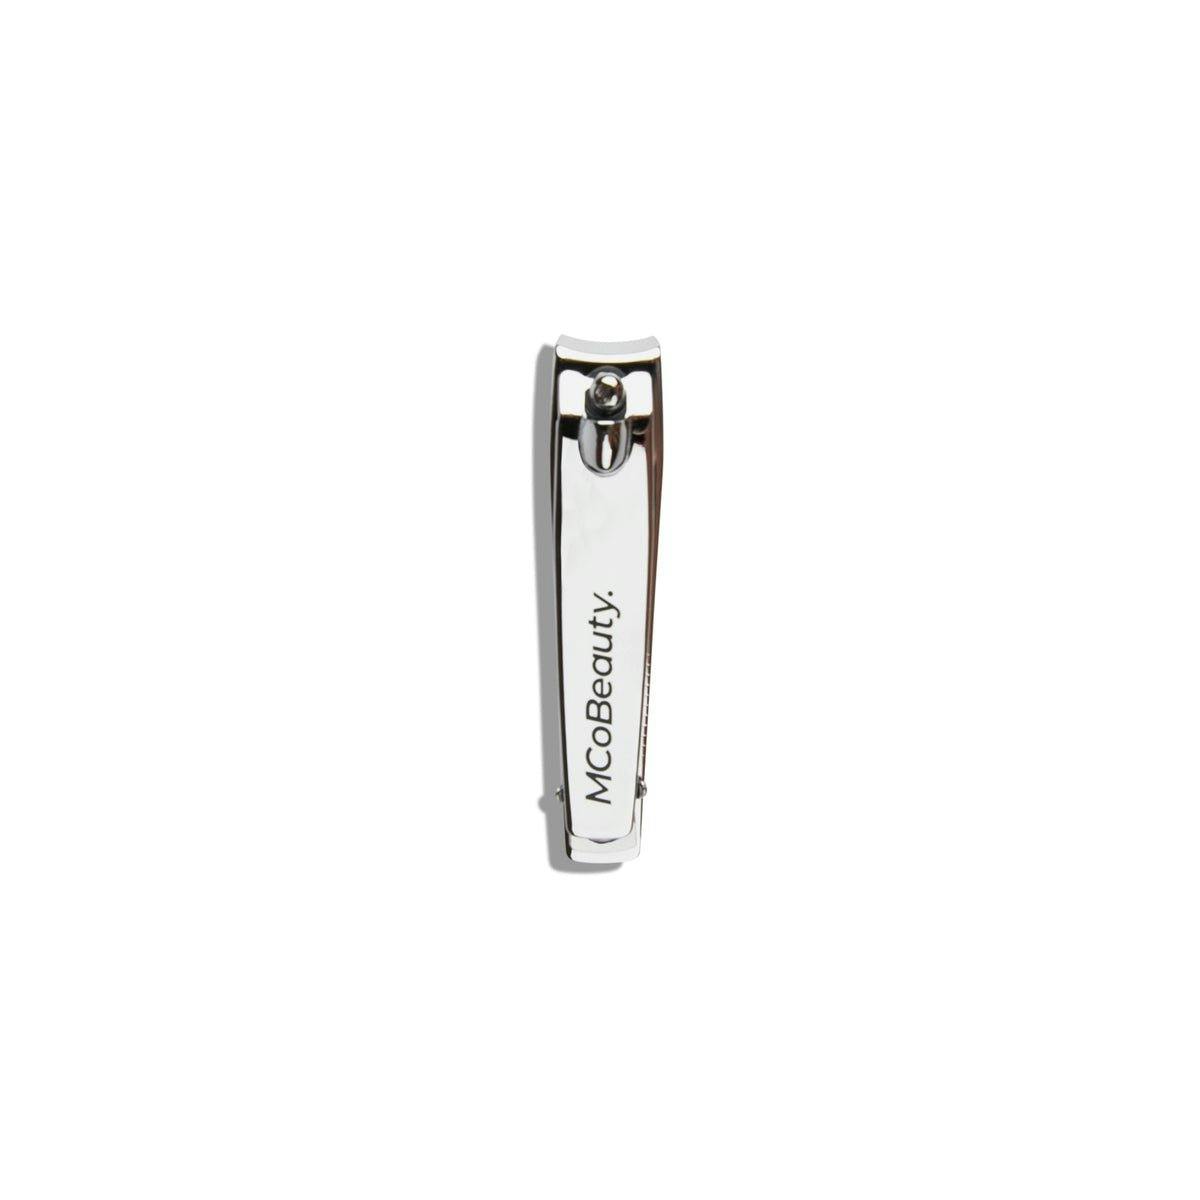 MCoBeauty Nail Clippers with Nail File